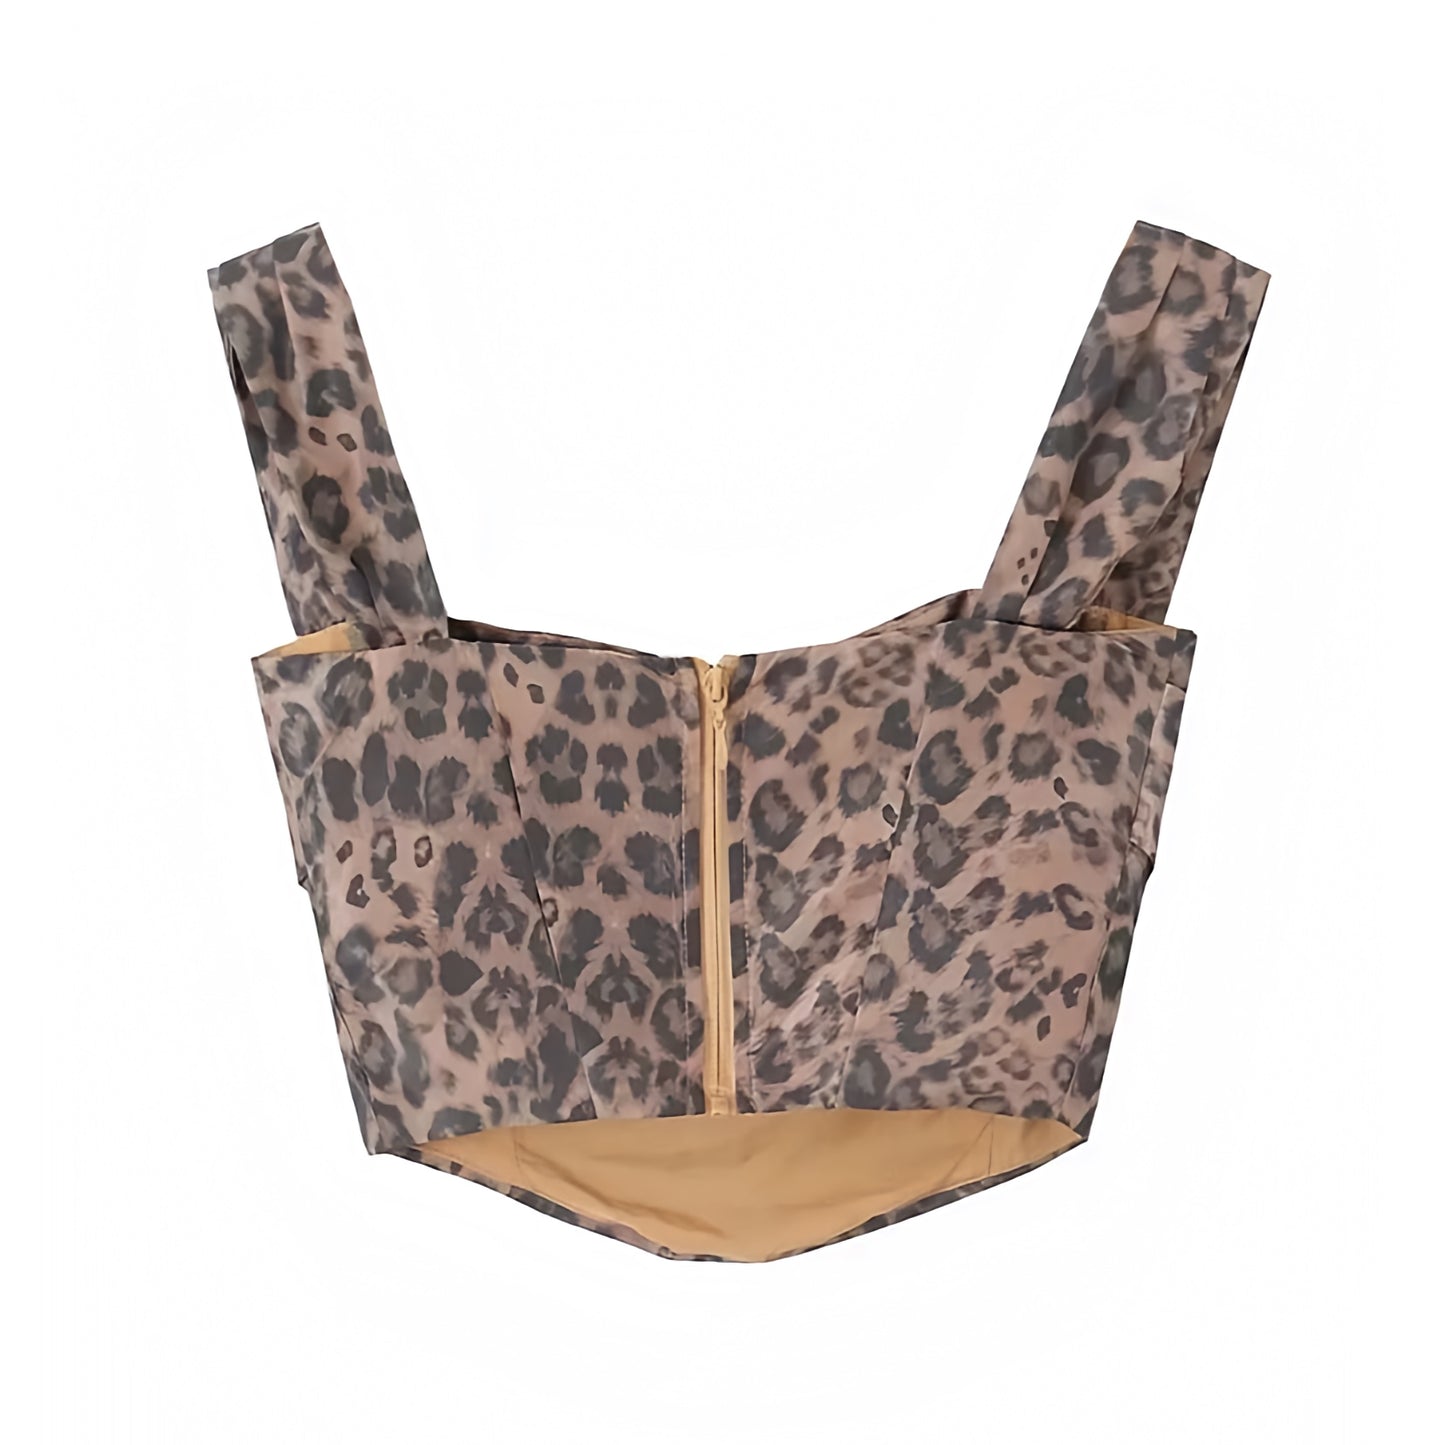 leopard-cheetah-animal-print-patterned-brown-black-multi-color-slim-fit-corset-bustier-ruched-sleeveless-spaghetti-strap-cami-crop-tank-top-blouse-women-ladies-chic-trendy-spring-2024-summer-casual-classy-feminine-party-date-night-out-sexy-club-wear-y2k-exotic-tropical-vacation-beach-wear-zara-revolve-white-fox-princess-polly-edikted-emminol-reformation-brandy-melville